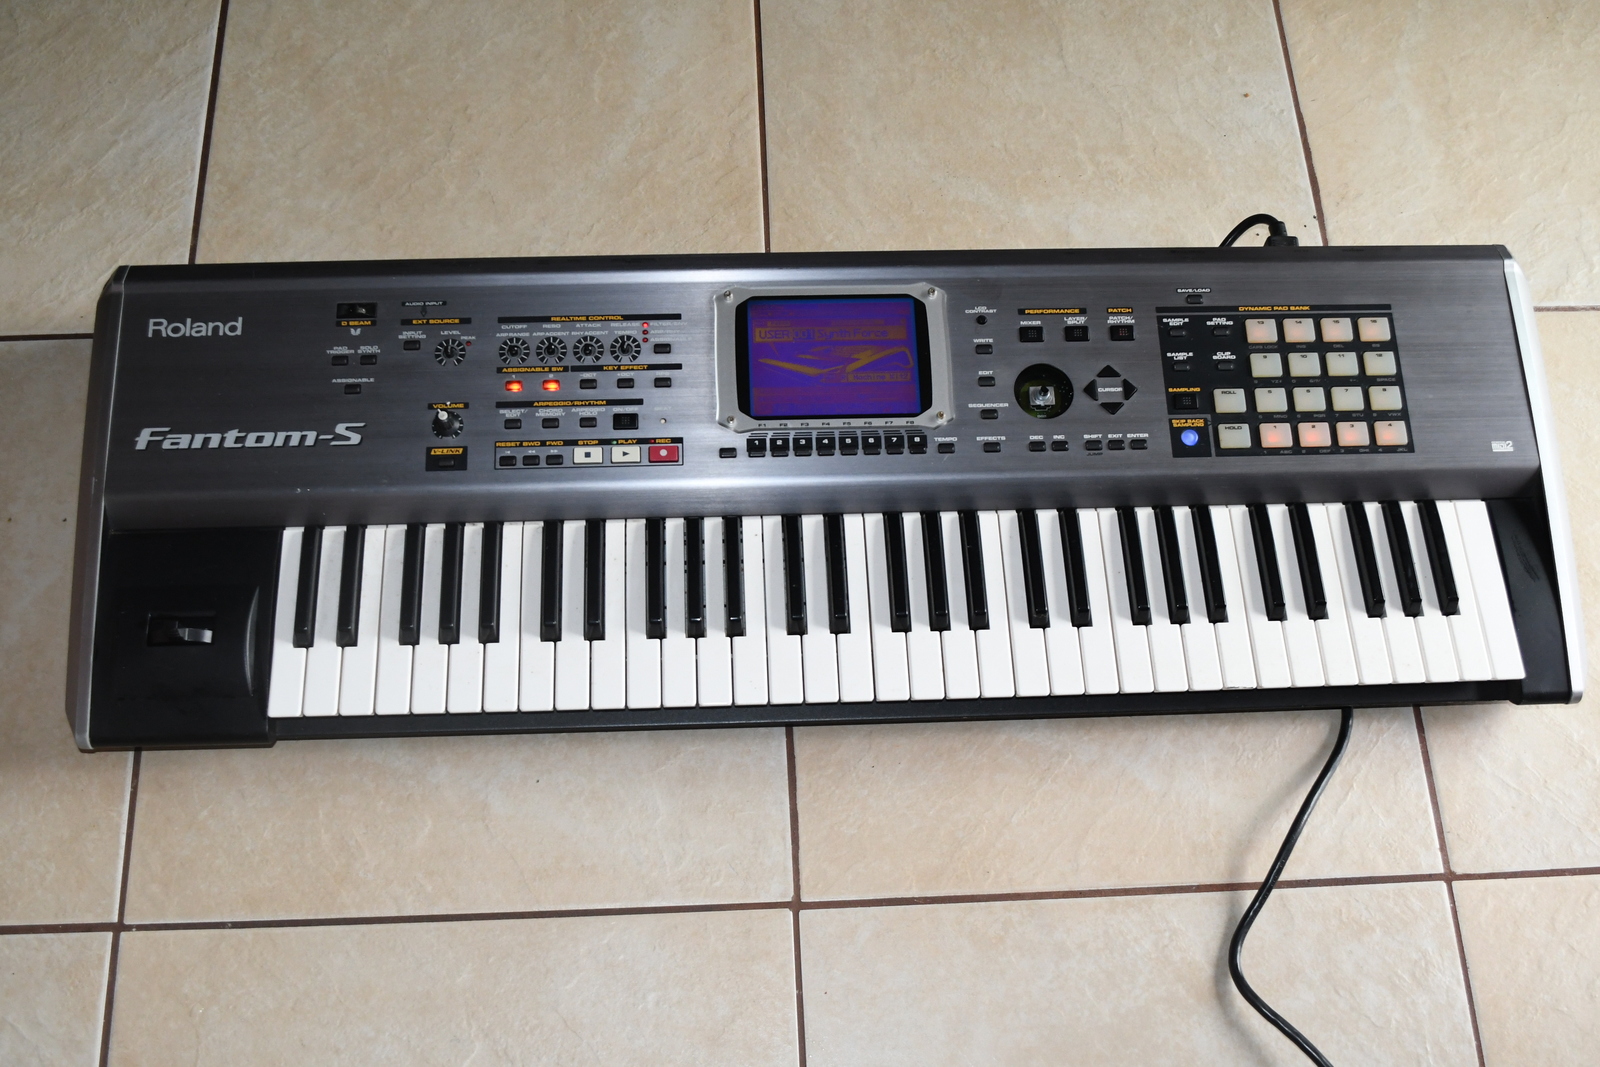 Roland Fantom s Music Workstation Keyboard synth Synthesizer ultra rare 515c  - $1,100.00